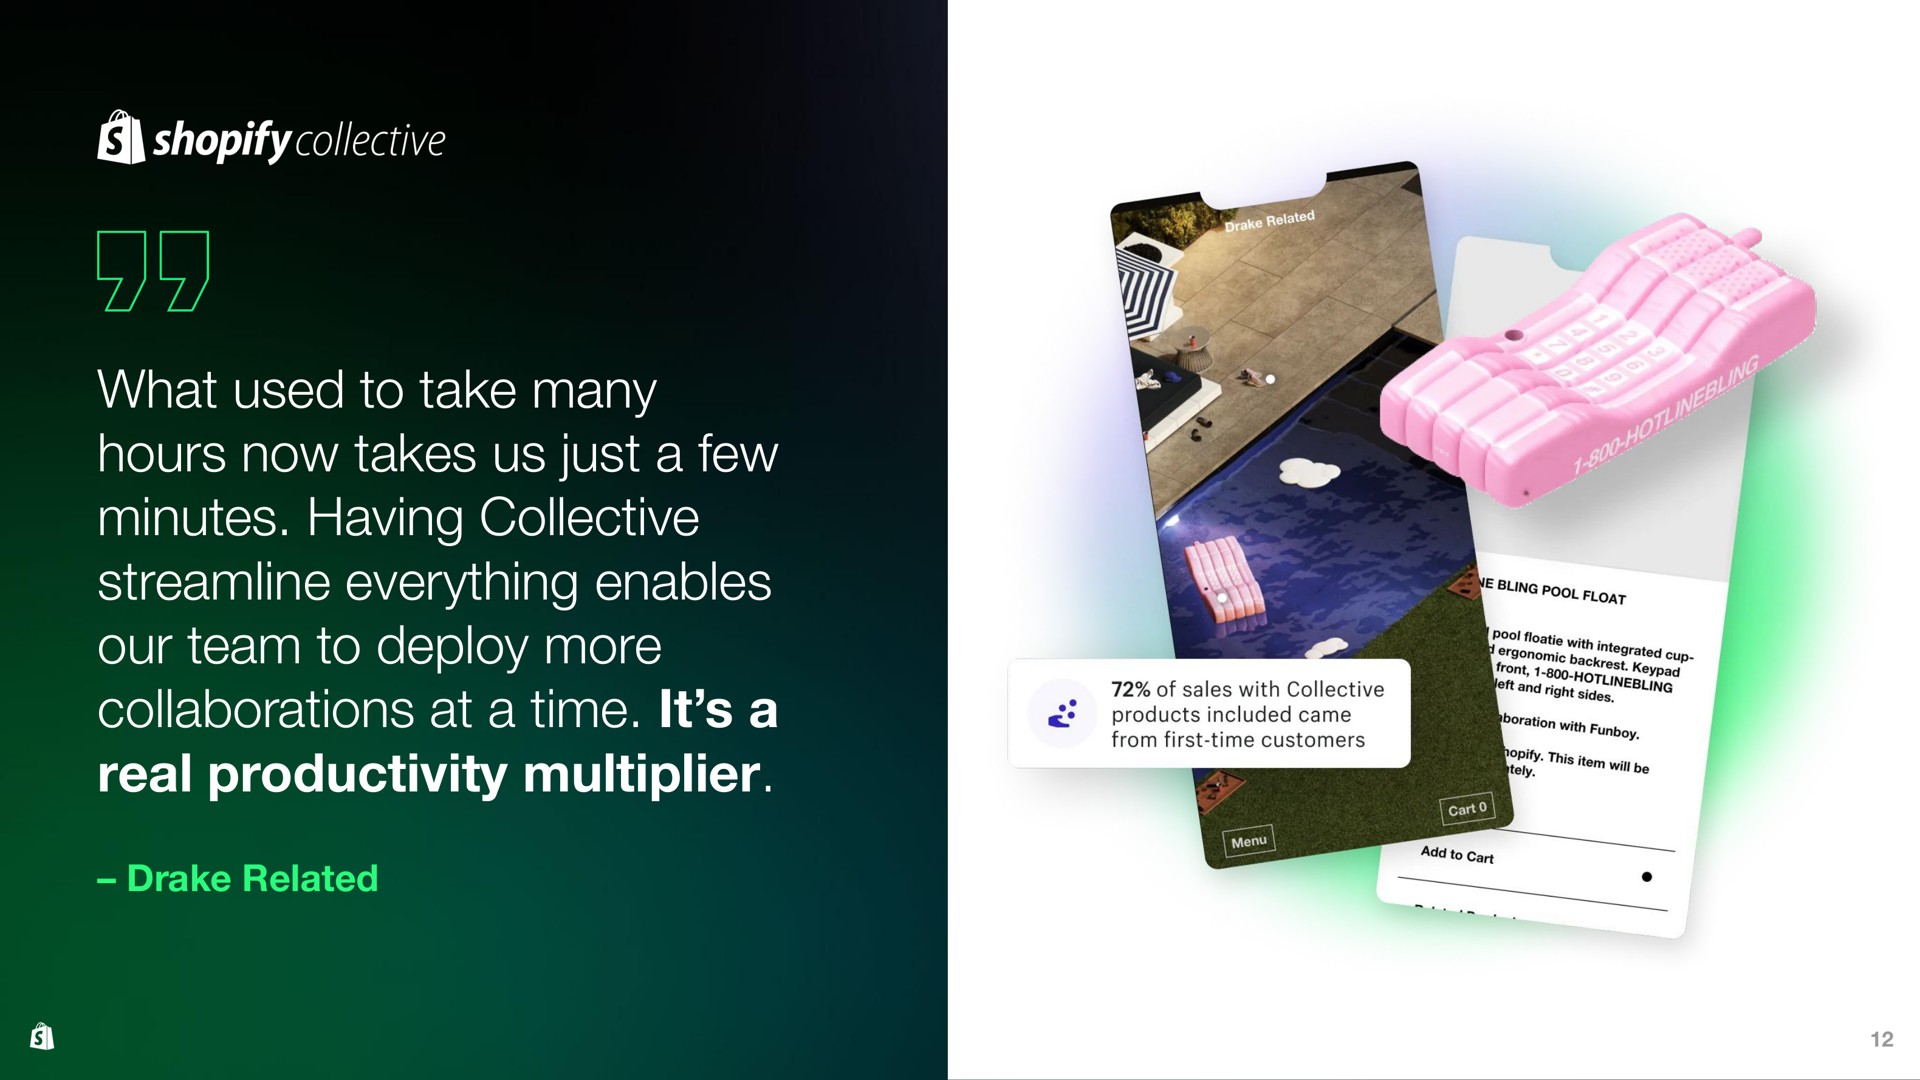 what used to take many hours now takes us just a few minutes having collective streamline everything enables our team to deploy more collaborations at a time it a real productivity multiplier tip be loa products included came | Shopify